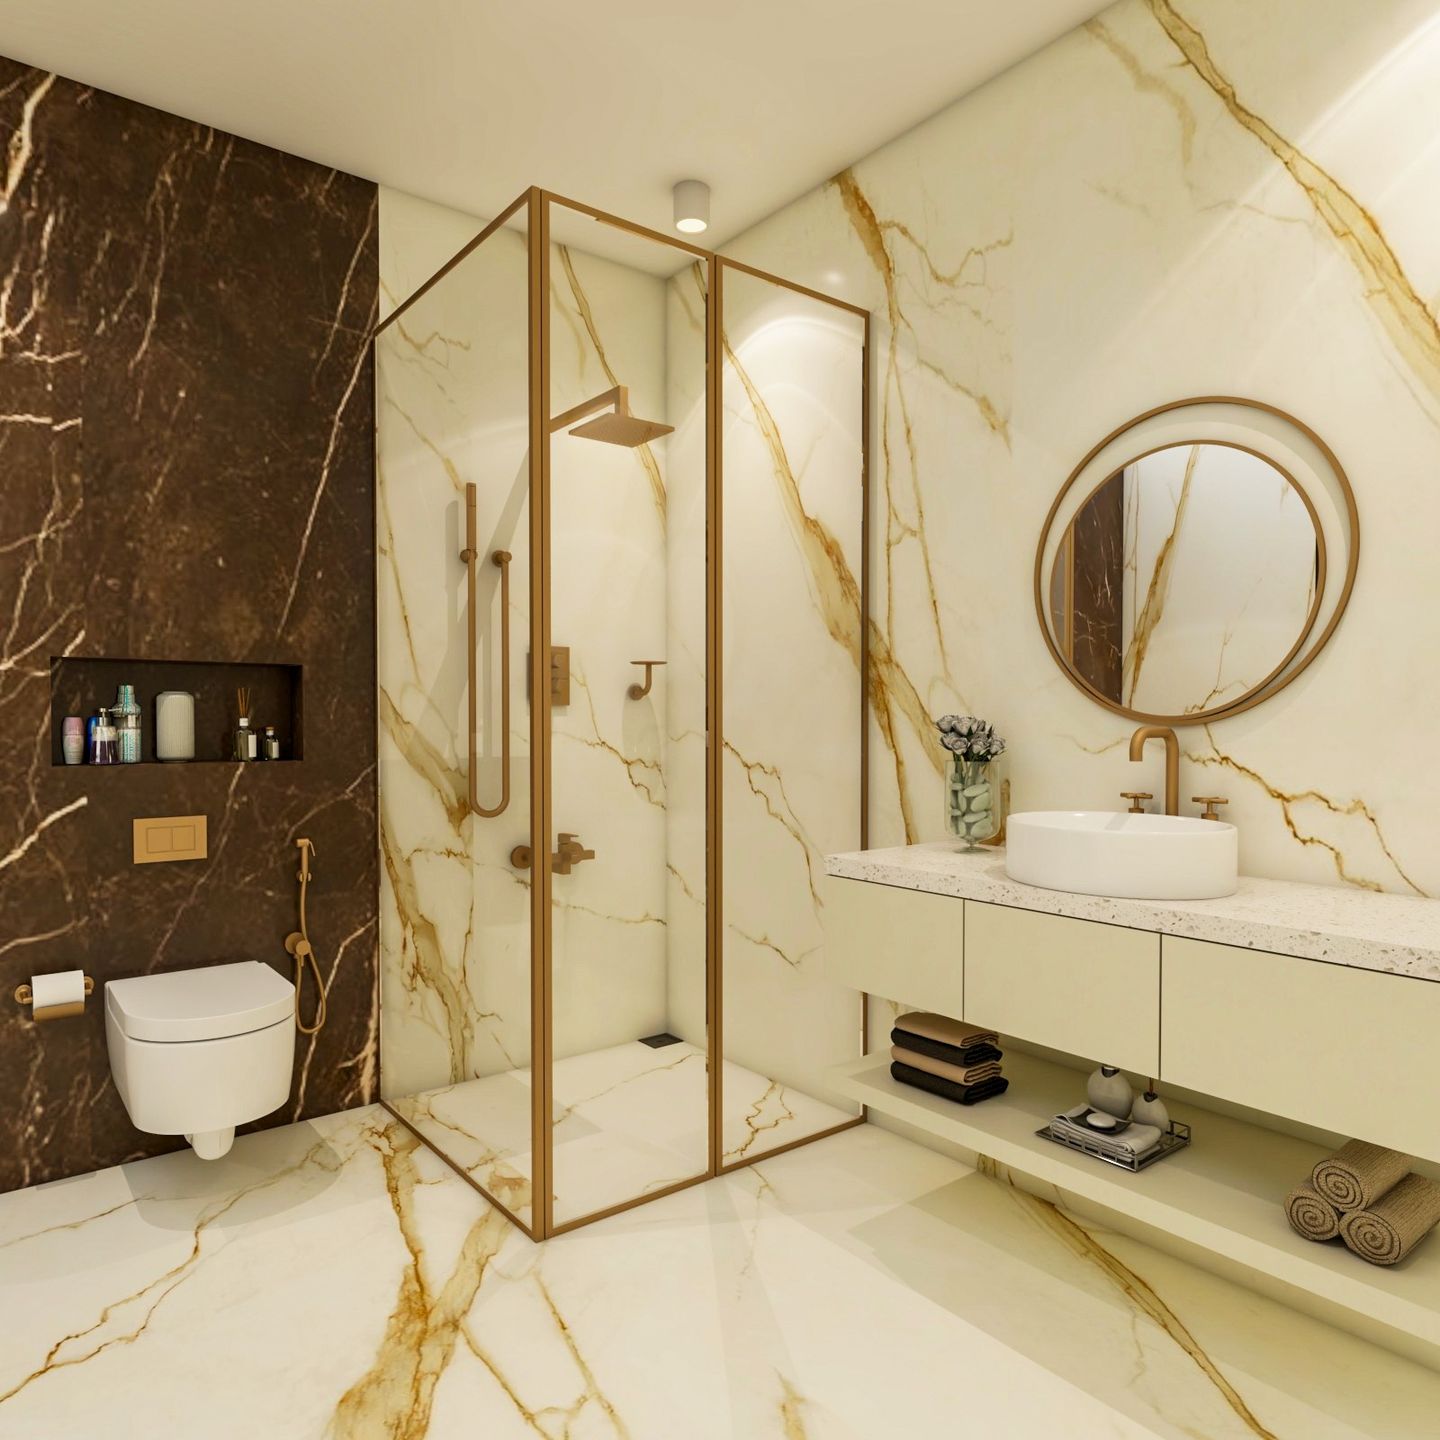 White, Gold And Brown Bathroom Design With Marble Wall And Flooring - Livspace